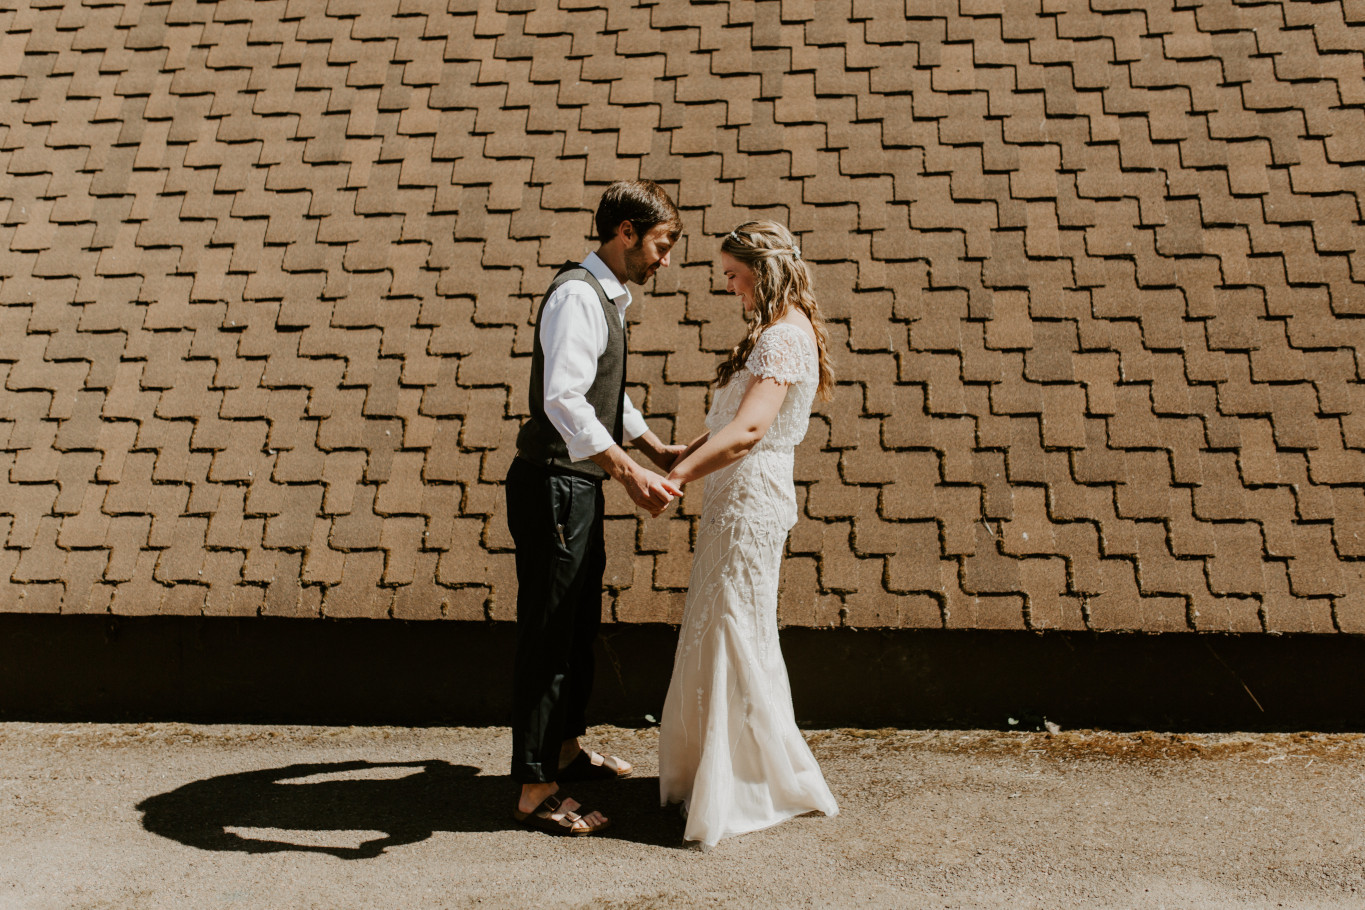 Dan and Hannah admire each other in Oregon for their Oregon Adventure. Intimate wedding photography in Corvallis Oregon by Sienna Plus Josh.